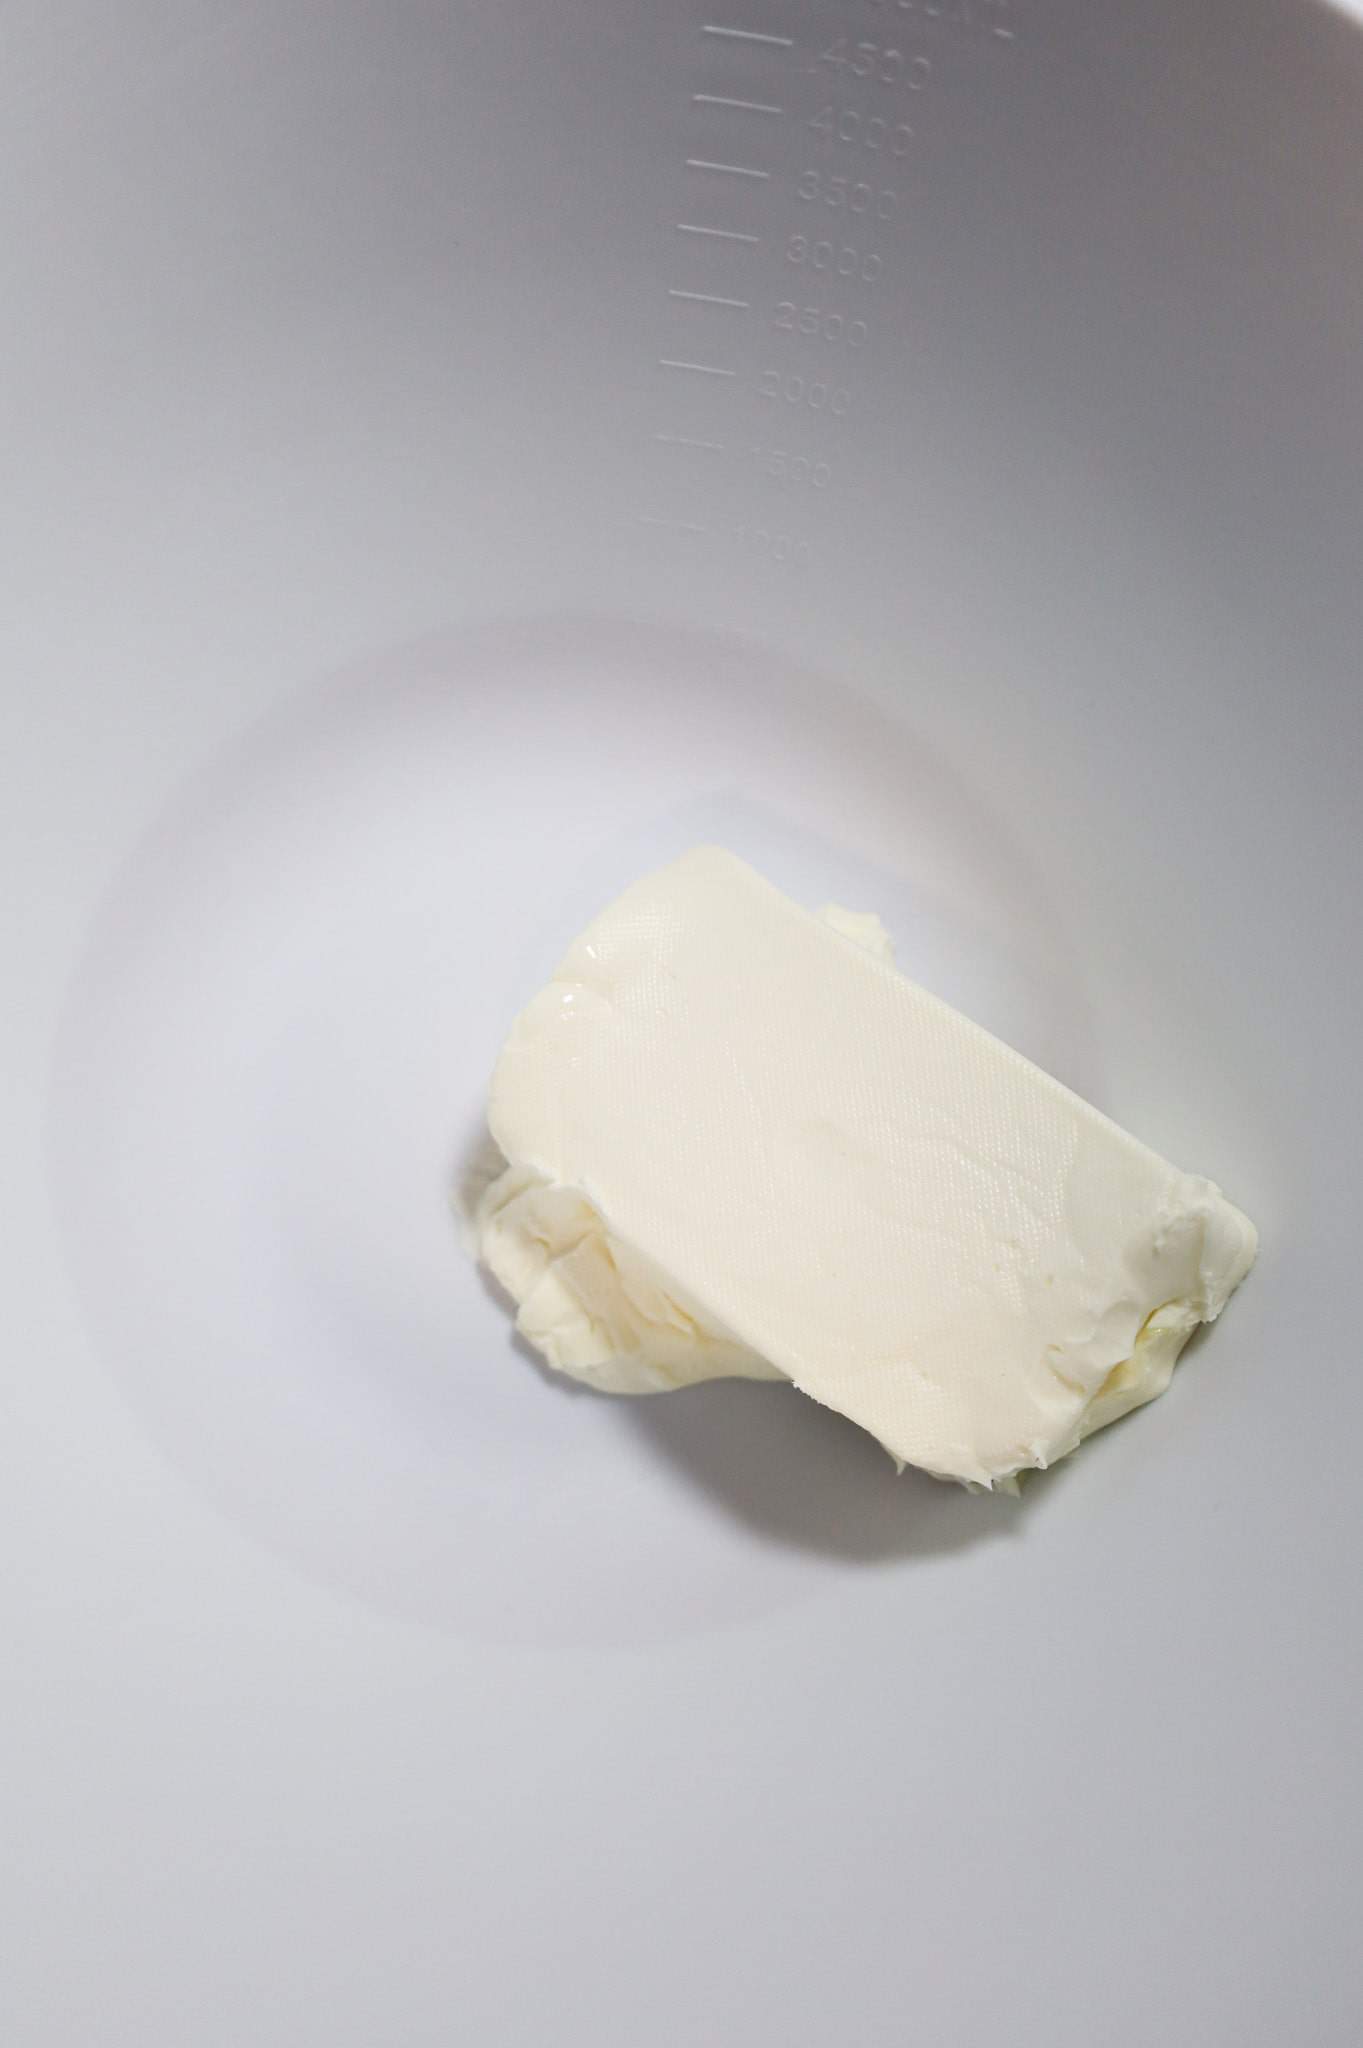 softened cream cheese in a mixing bowl